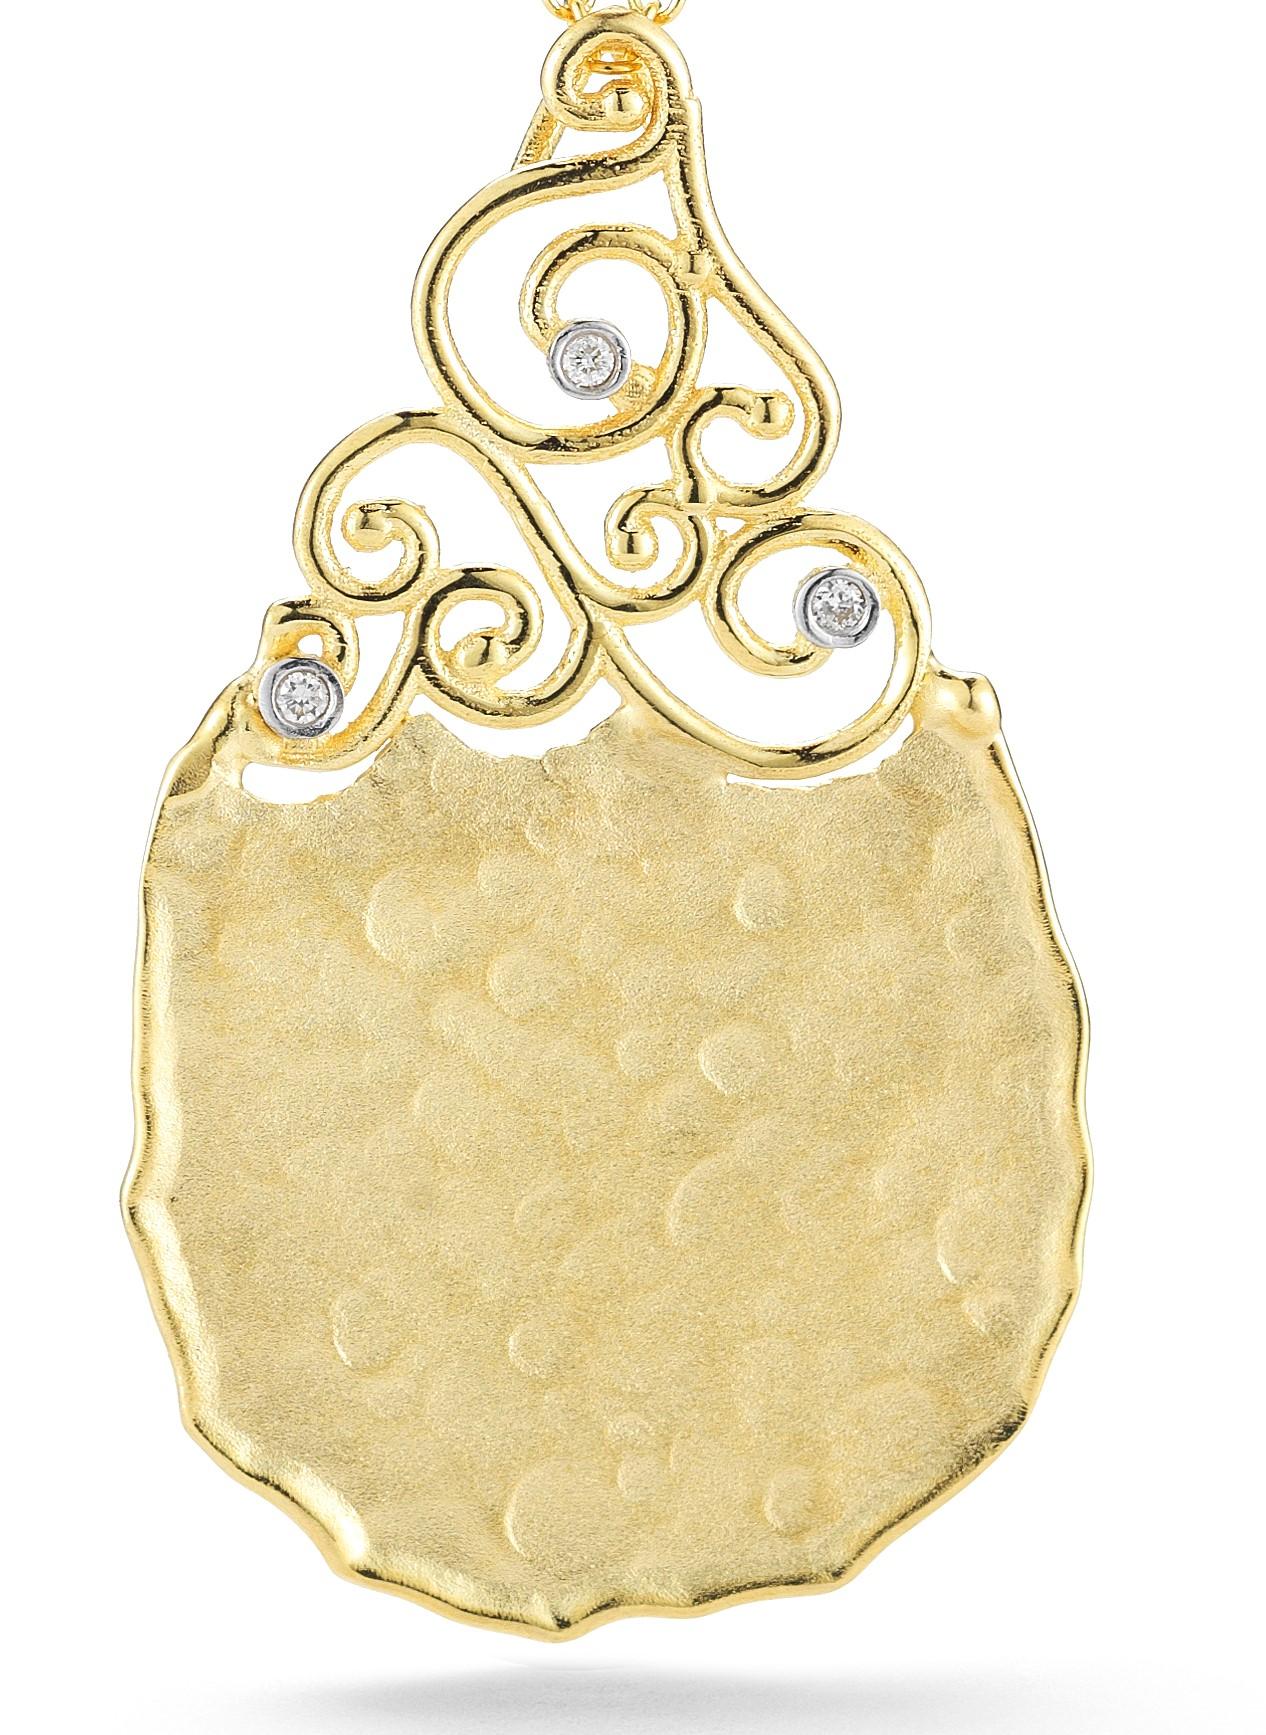 14 Karat Yellow Gold Hand-Crafted Matte And Hammered-Finished Scallop-Edged Filigree Tear-Drop Shaped Pendant, Accented with 0.022 Carats of Bezel Set Diamonds, Sliding on a 16